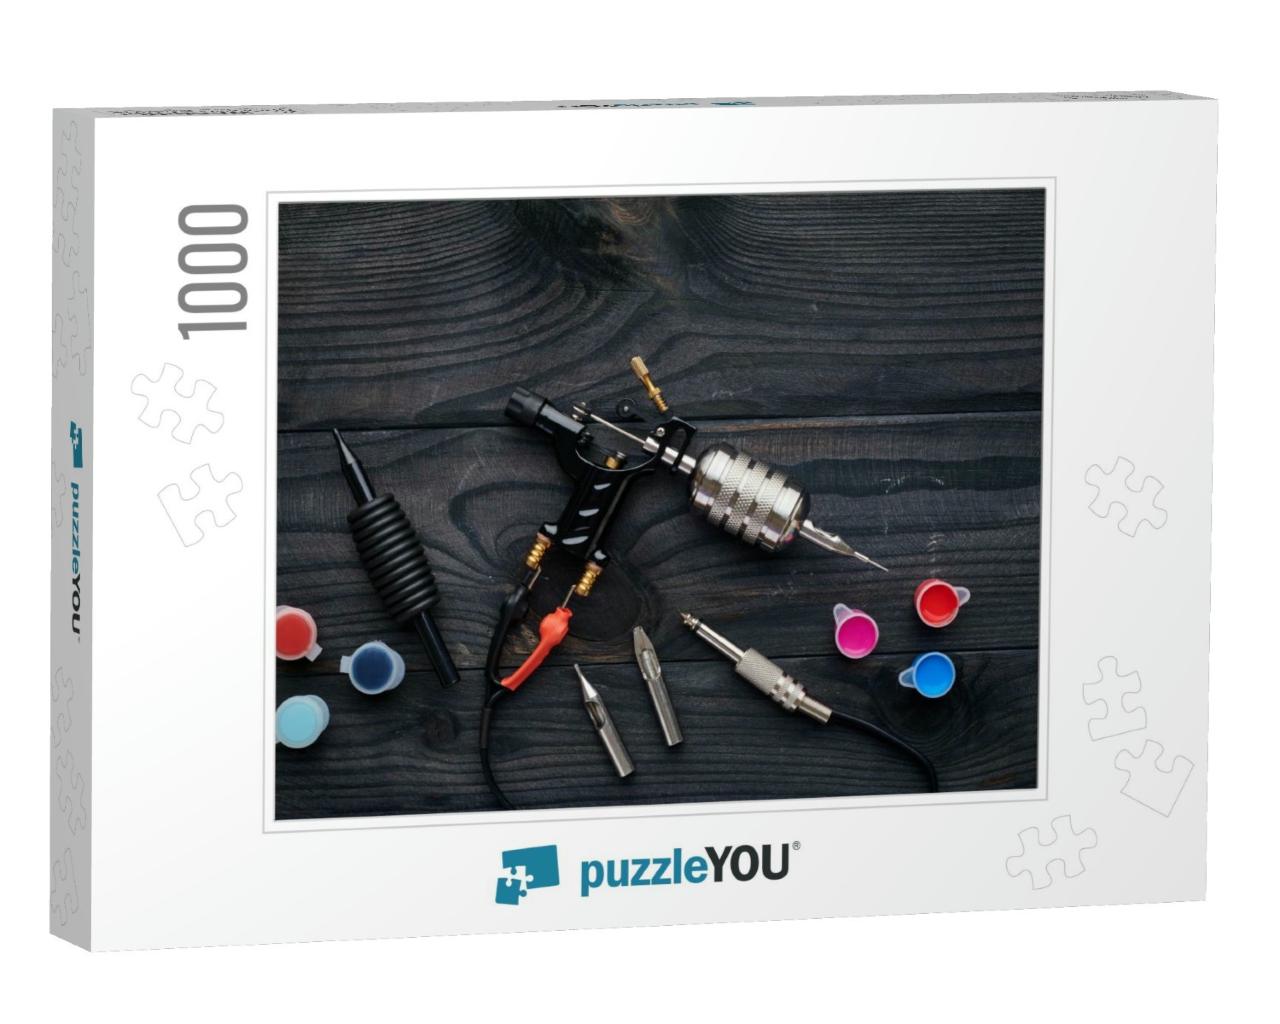 Tattoo Machine, Tools & Supplies Over Wooden Background... Jigsaw Puzzle with 1000 pieces